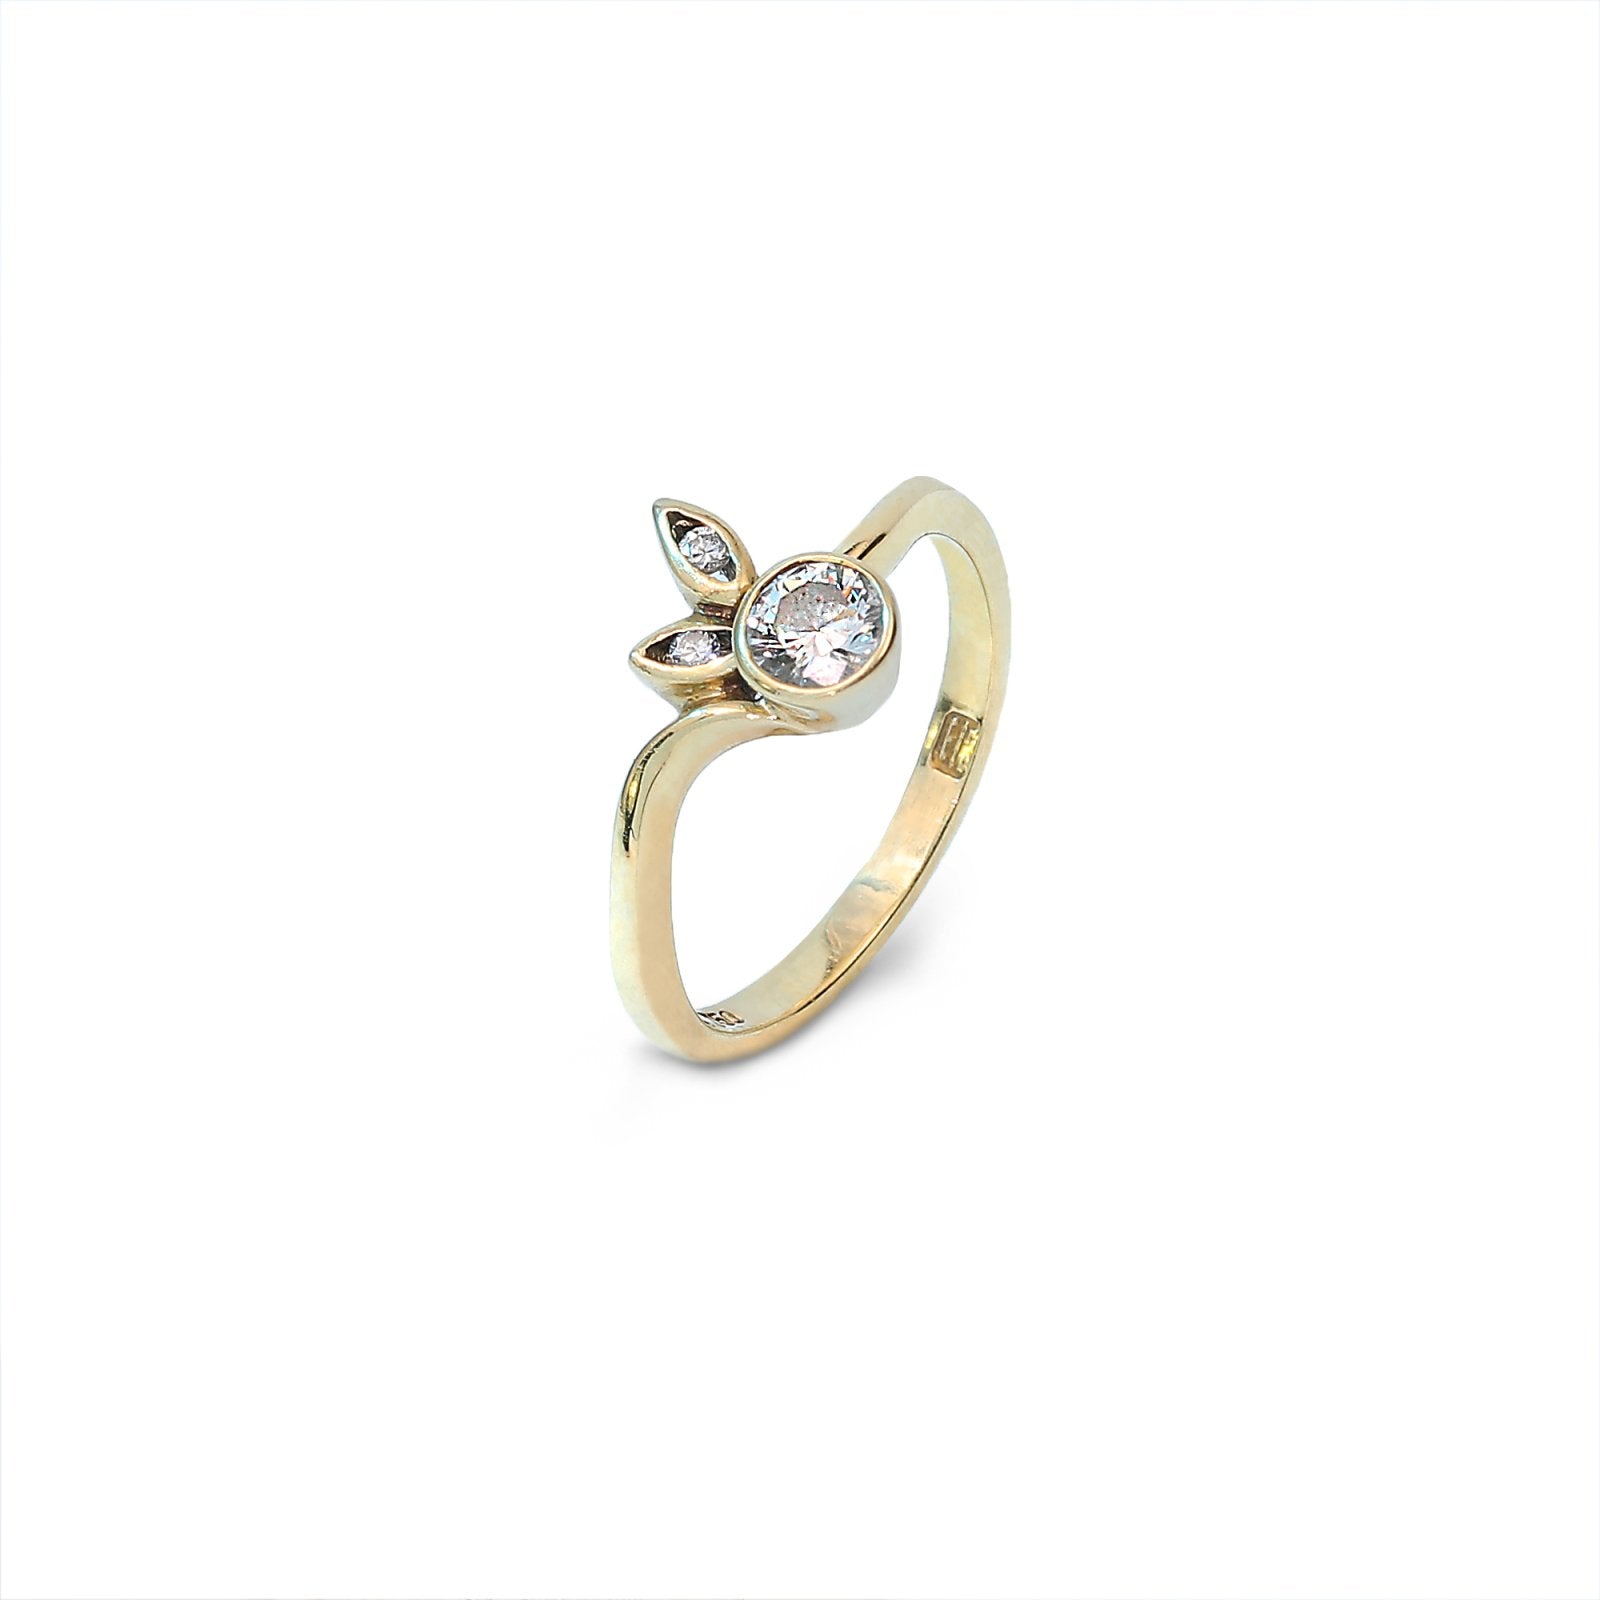 Yellow Gold Diamond Ring Centre Diamond: 0.3ct  and Two Small Diamonds in Leaf Shapes. 18k TDW:0.32ct VS H 2.6gr